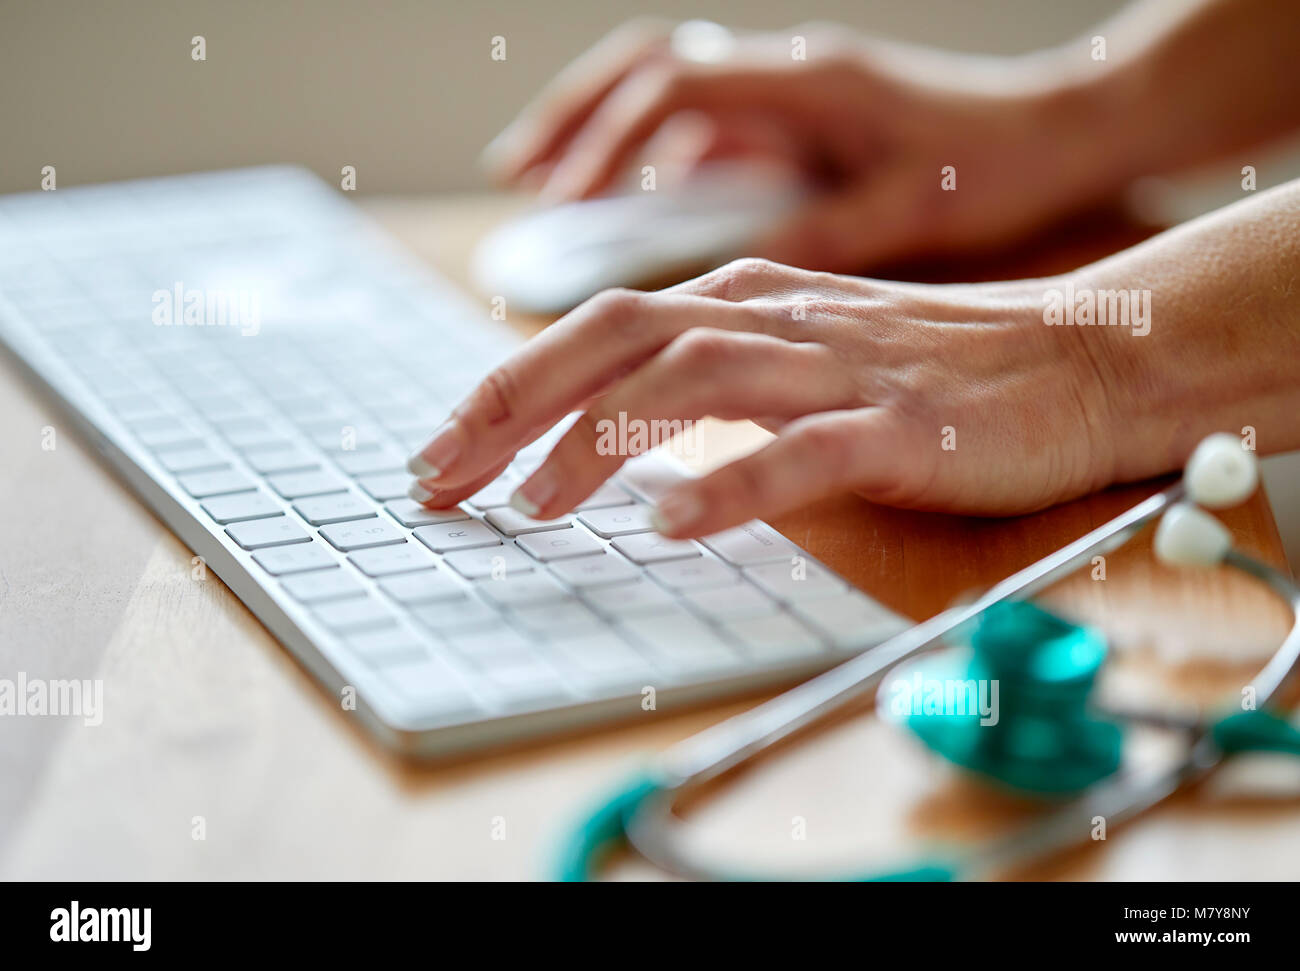 Close up view of keyboard and Stethoscope Stock Photo